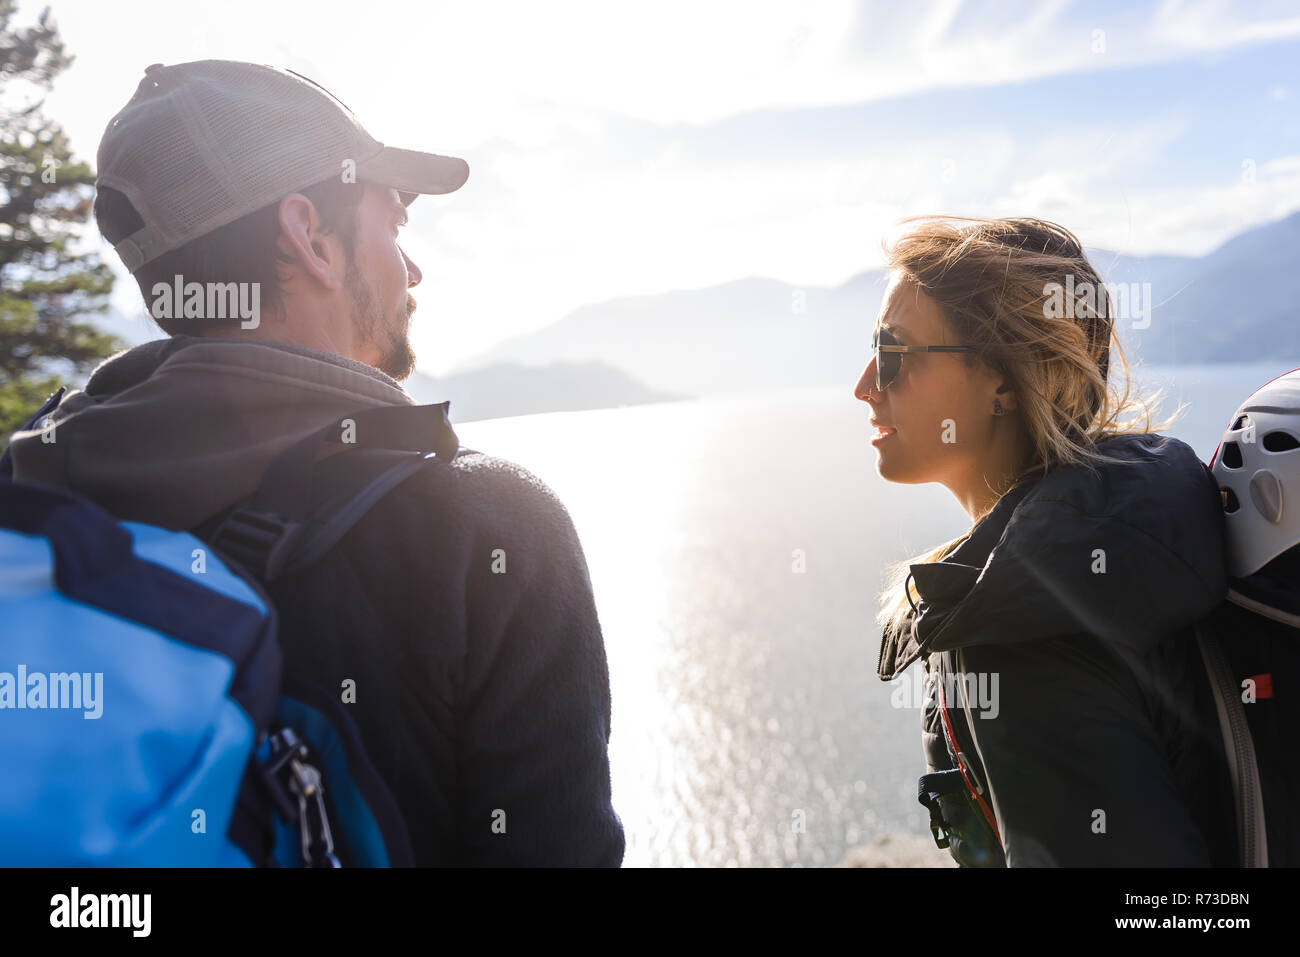 Rock climber couple on Malamute, Squamish, Canada Banque D'Images